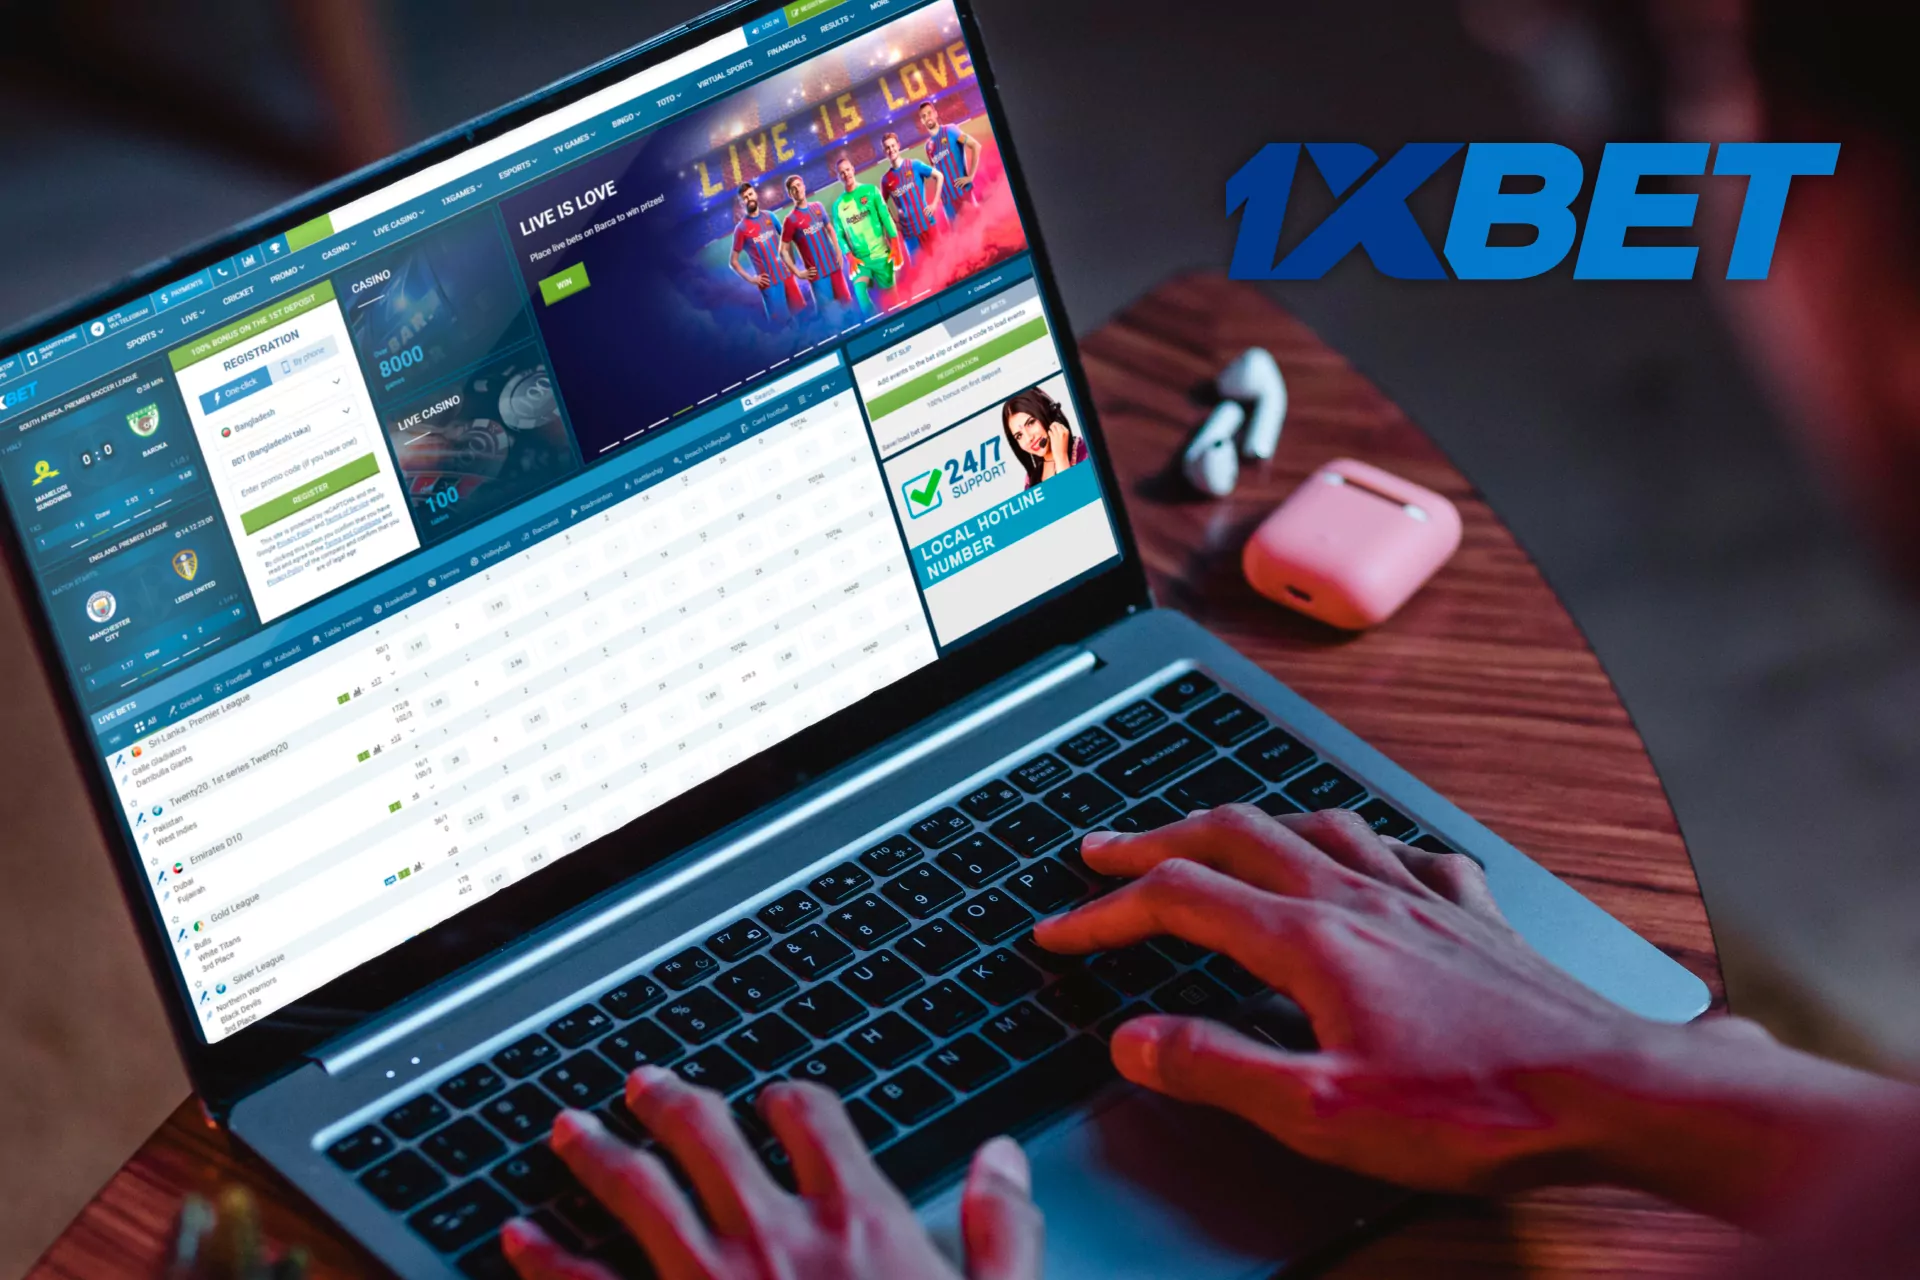 1xbet is a popular bookmaker that provides betting on sports and esports matches all over the world.